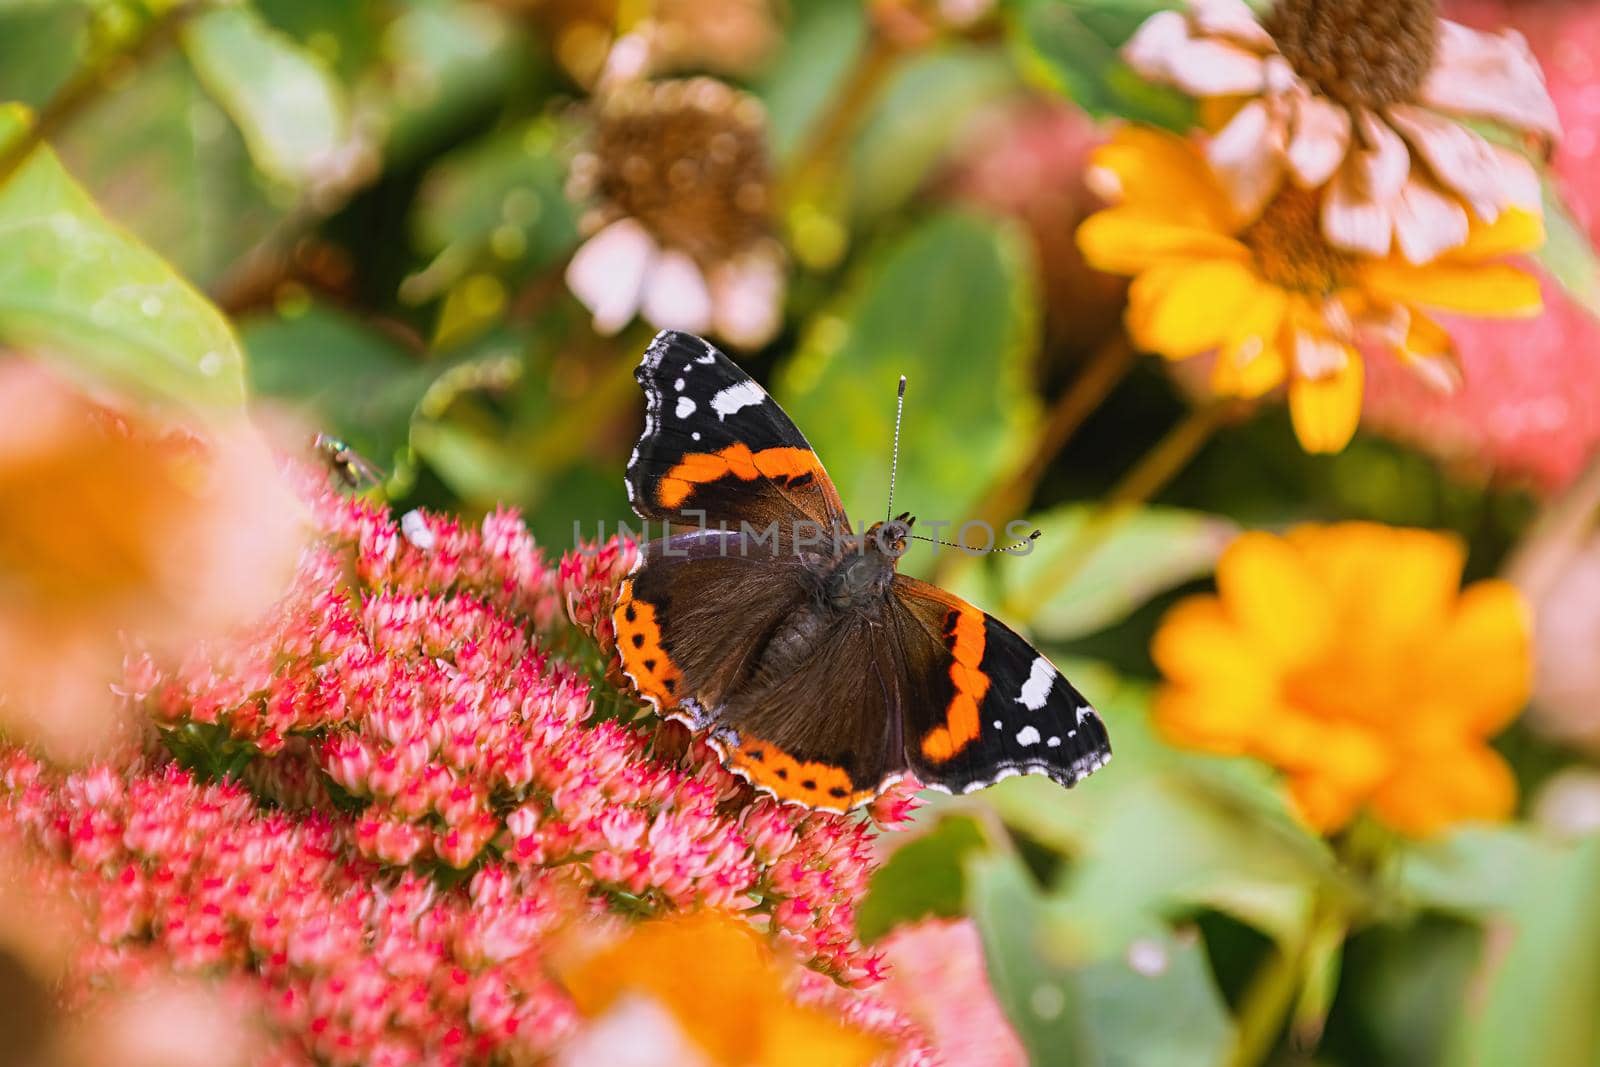 Butterfly Red admiral (Vanessa atalanta) on the flowers